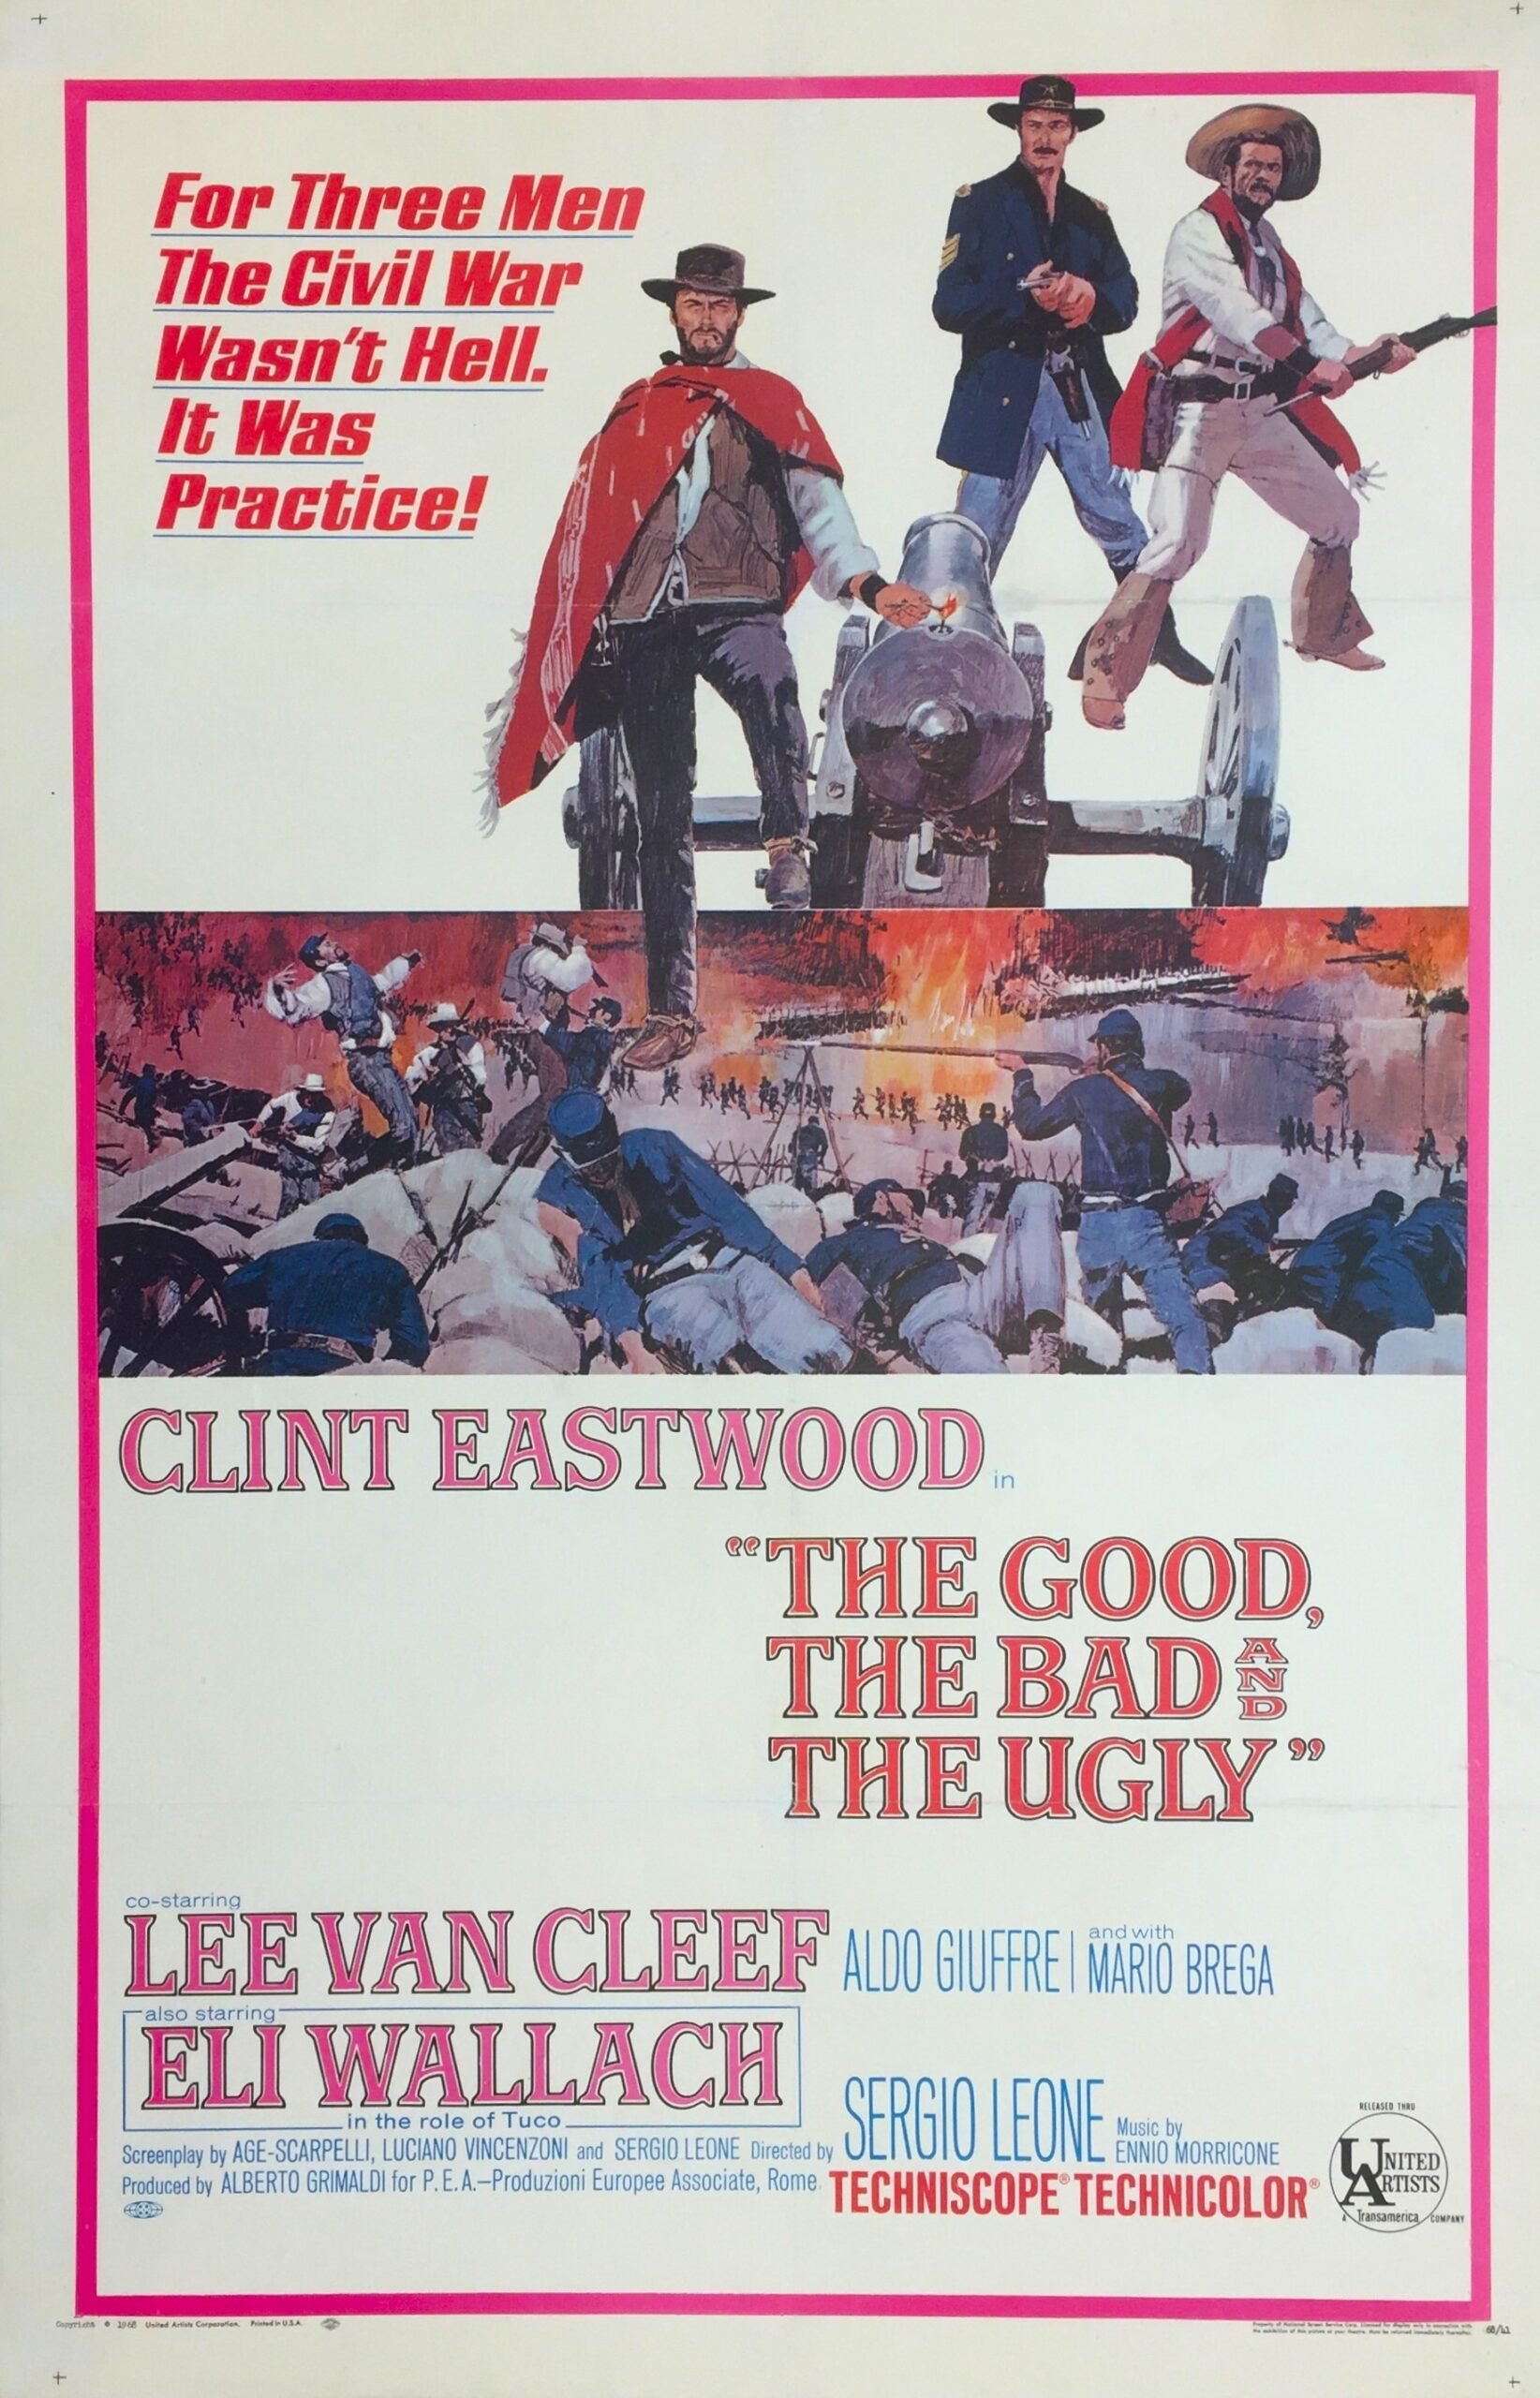 Original vintage cinema movie poster for The Good, the Bad and the Ugly